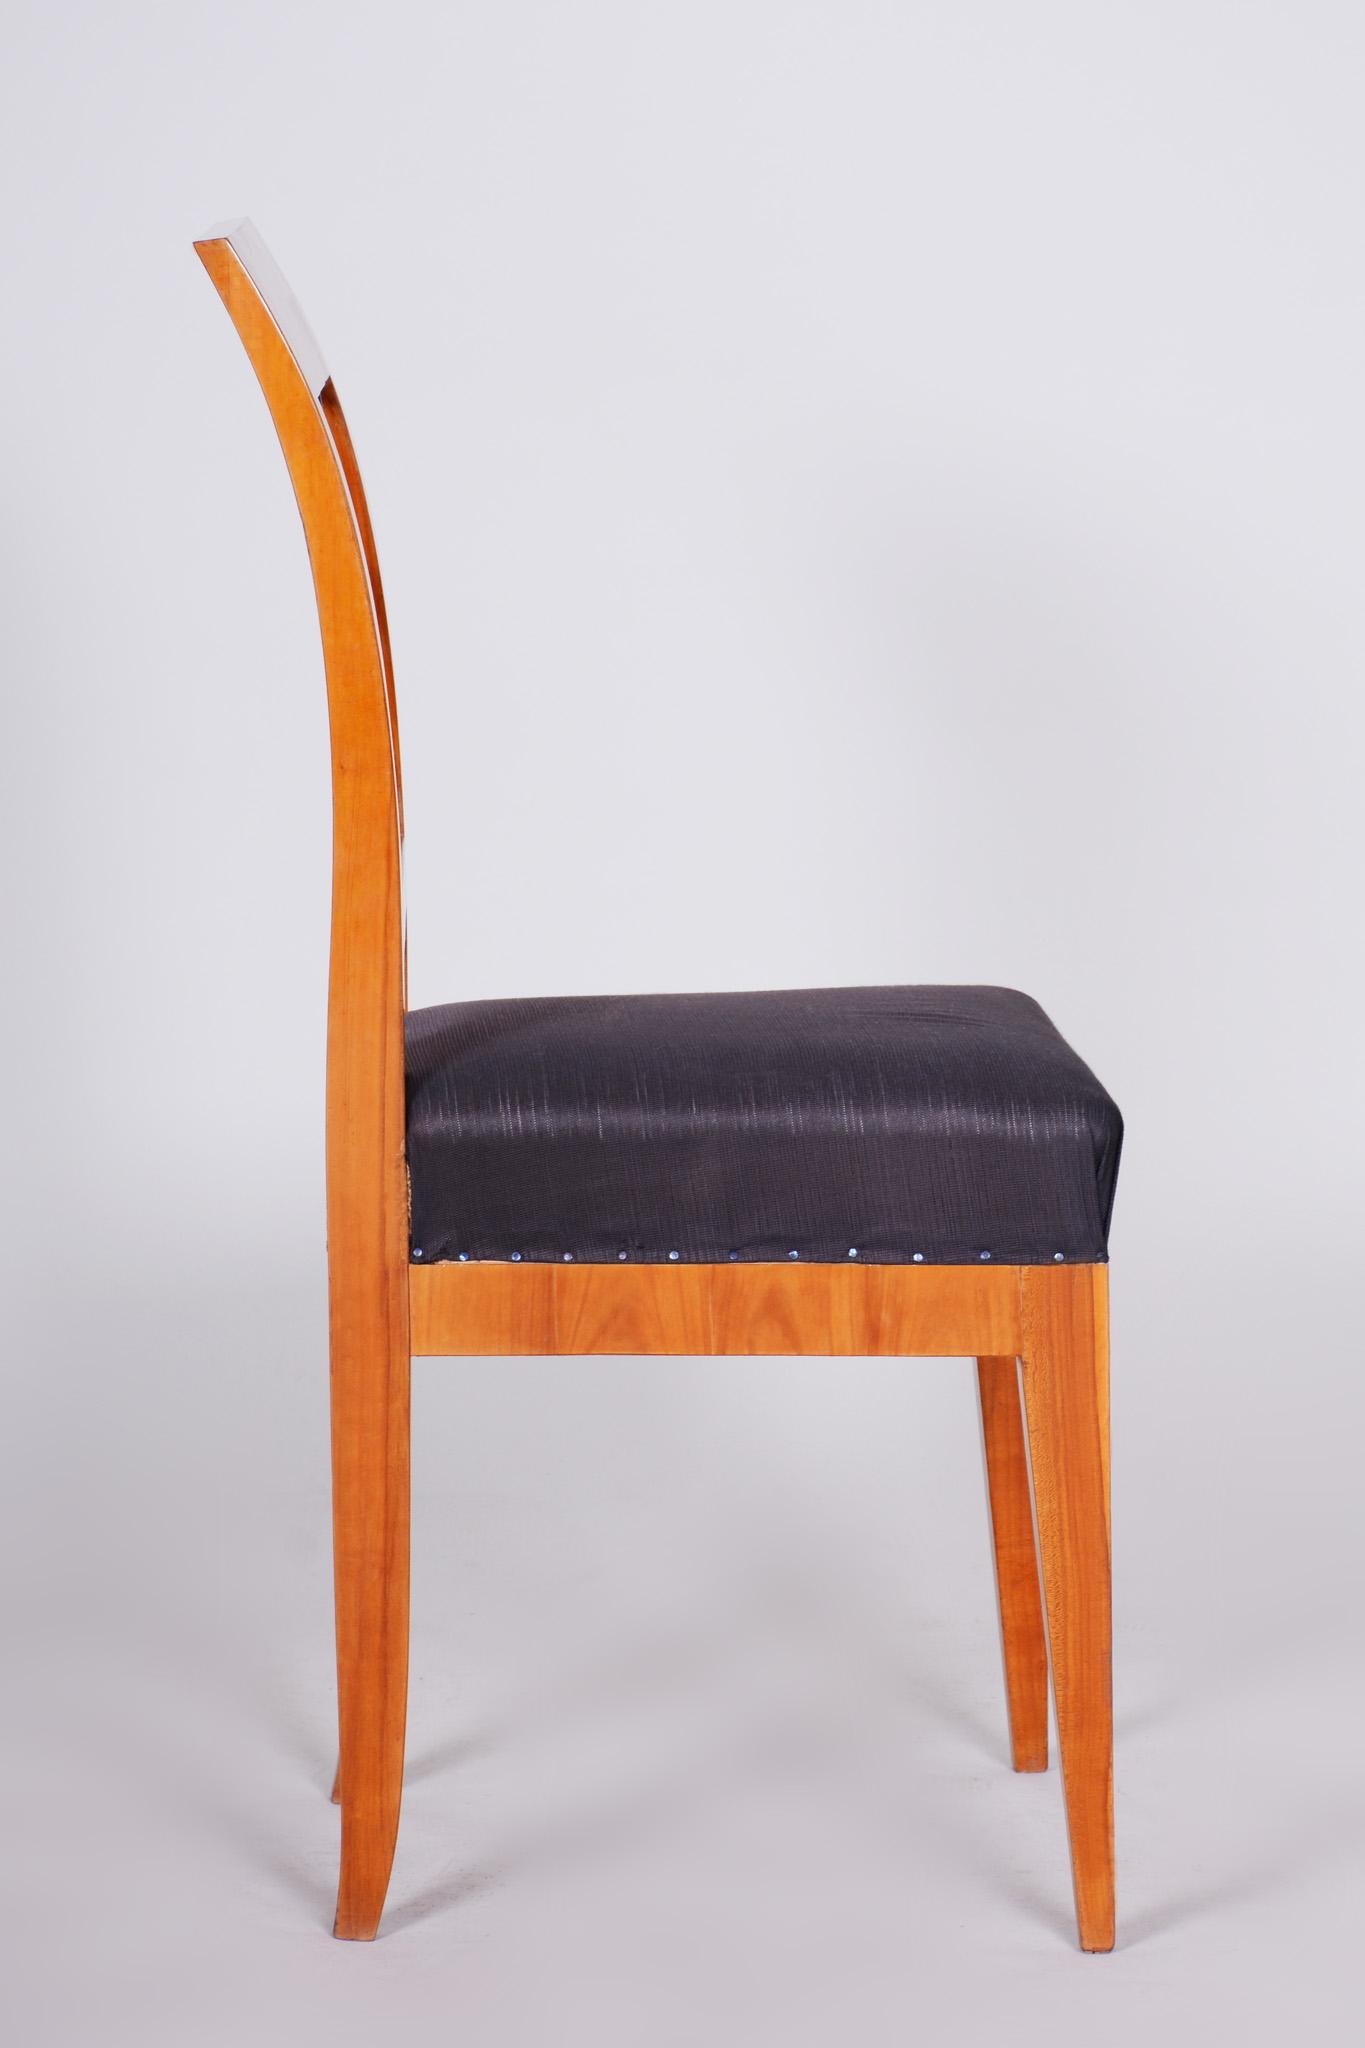 Biedermeir Dining Chair, Made in Czechia 1830s, Restored Cherry Tree For Sale 1